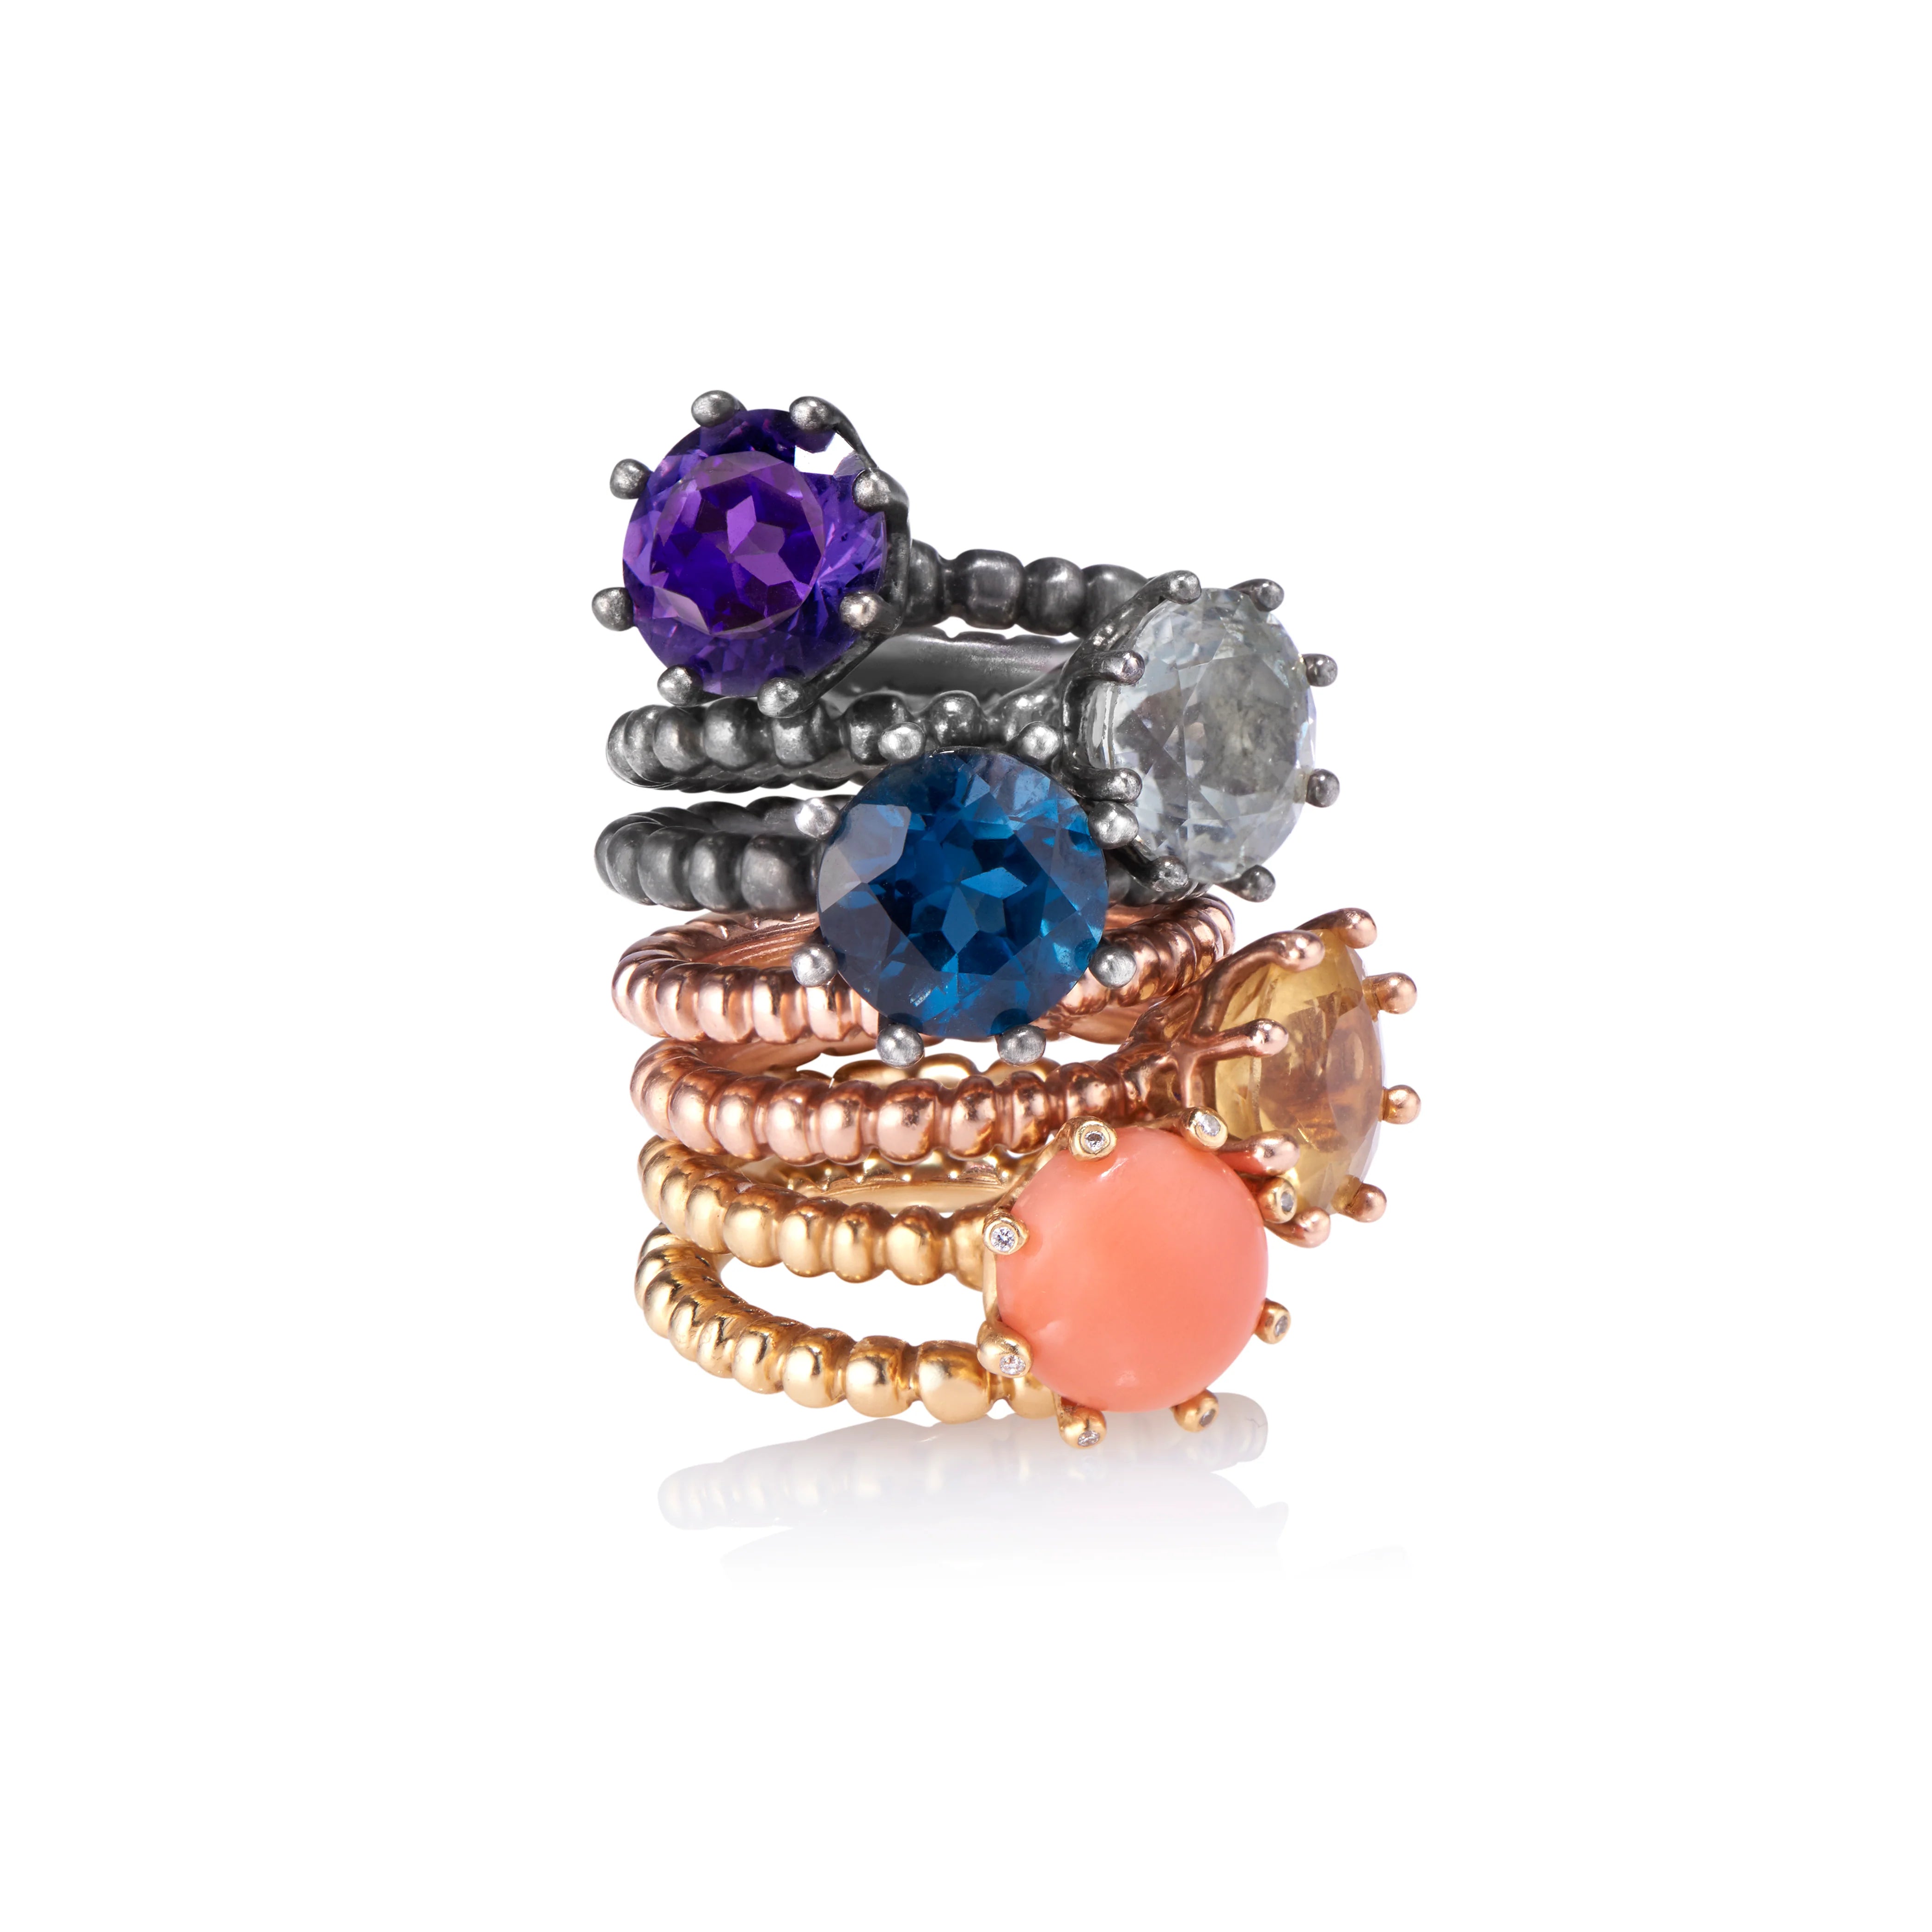 Coral Crown Ring - Nataly Aponte